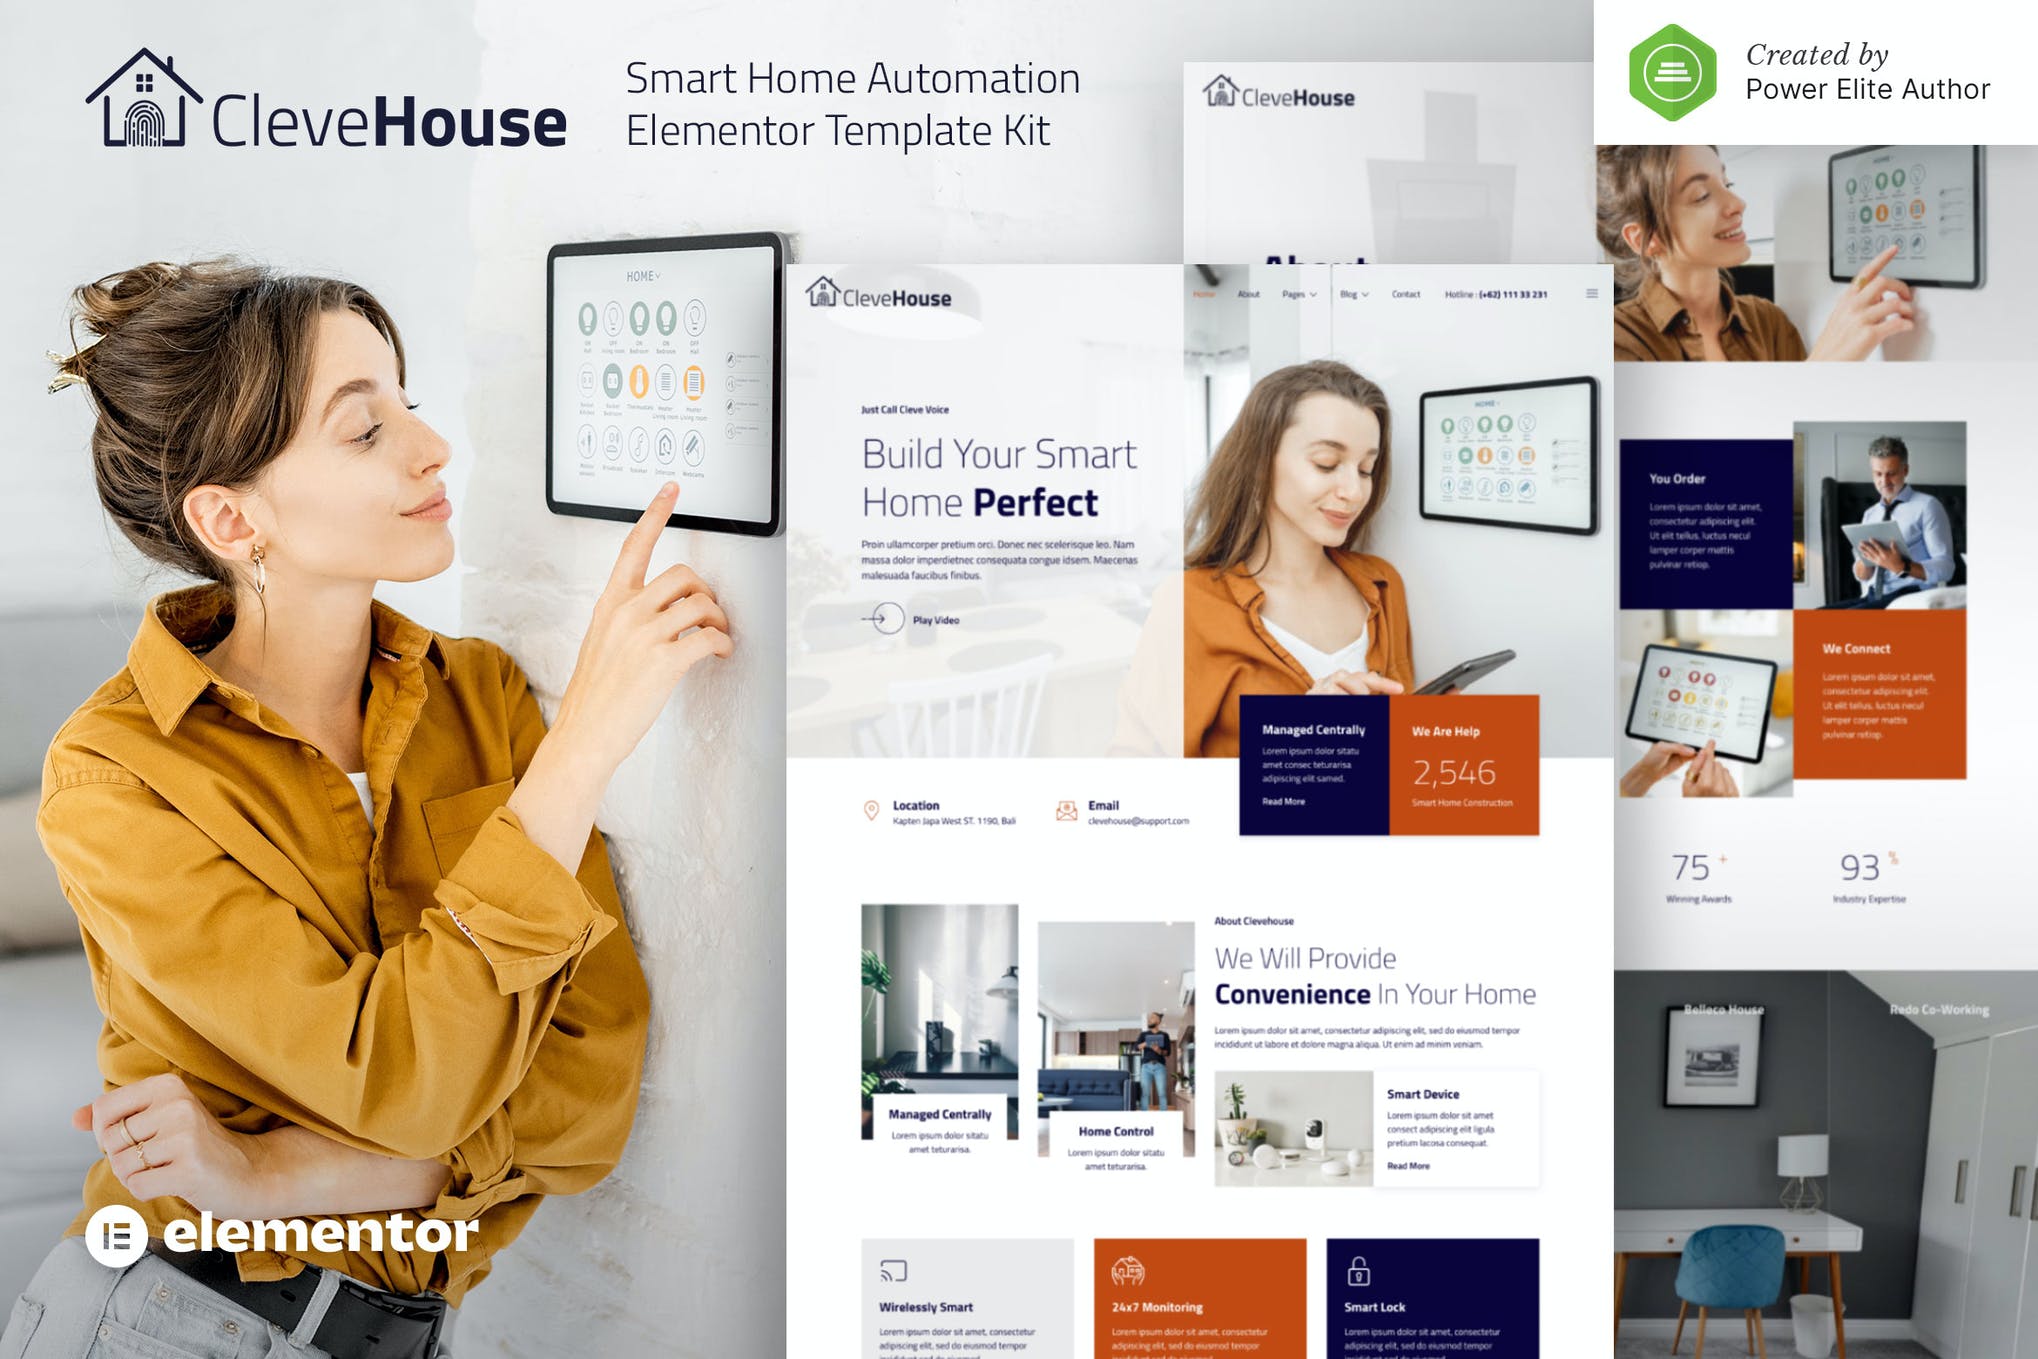 Clevehouse - Smart Home Automation Elementor Template Kit